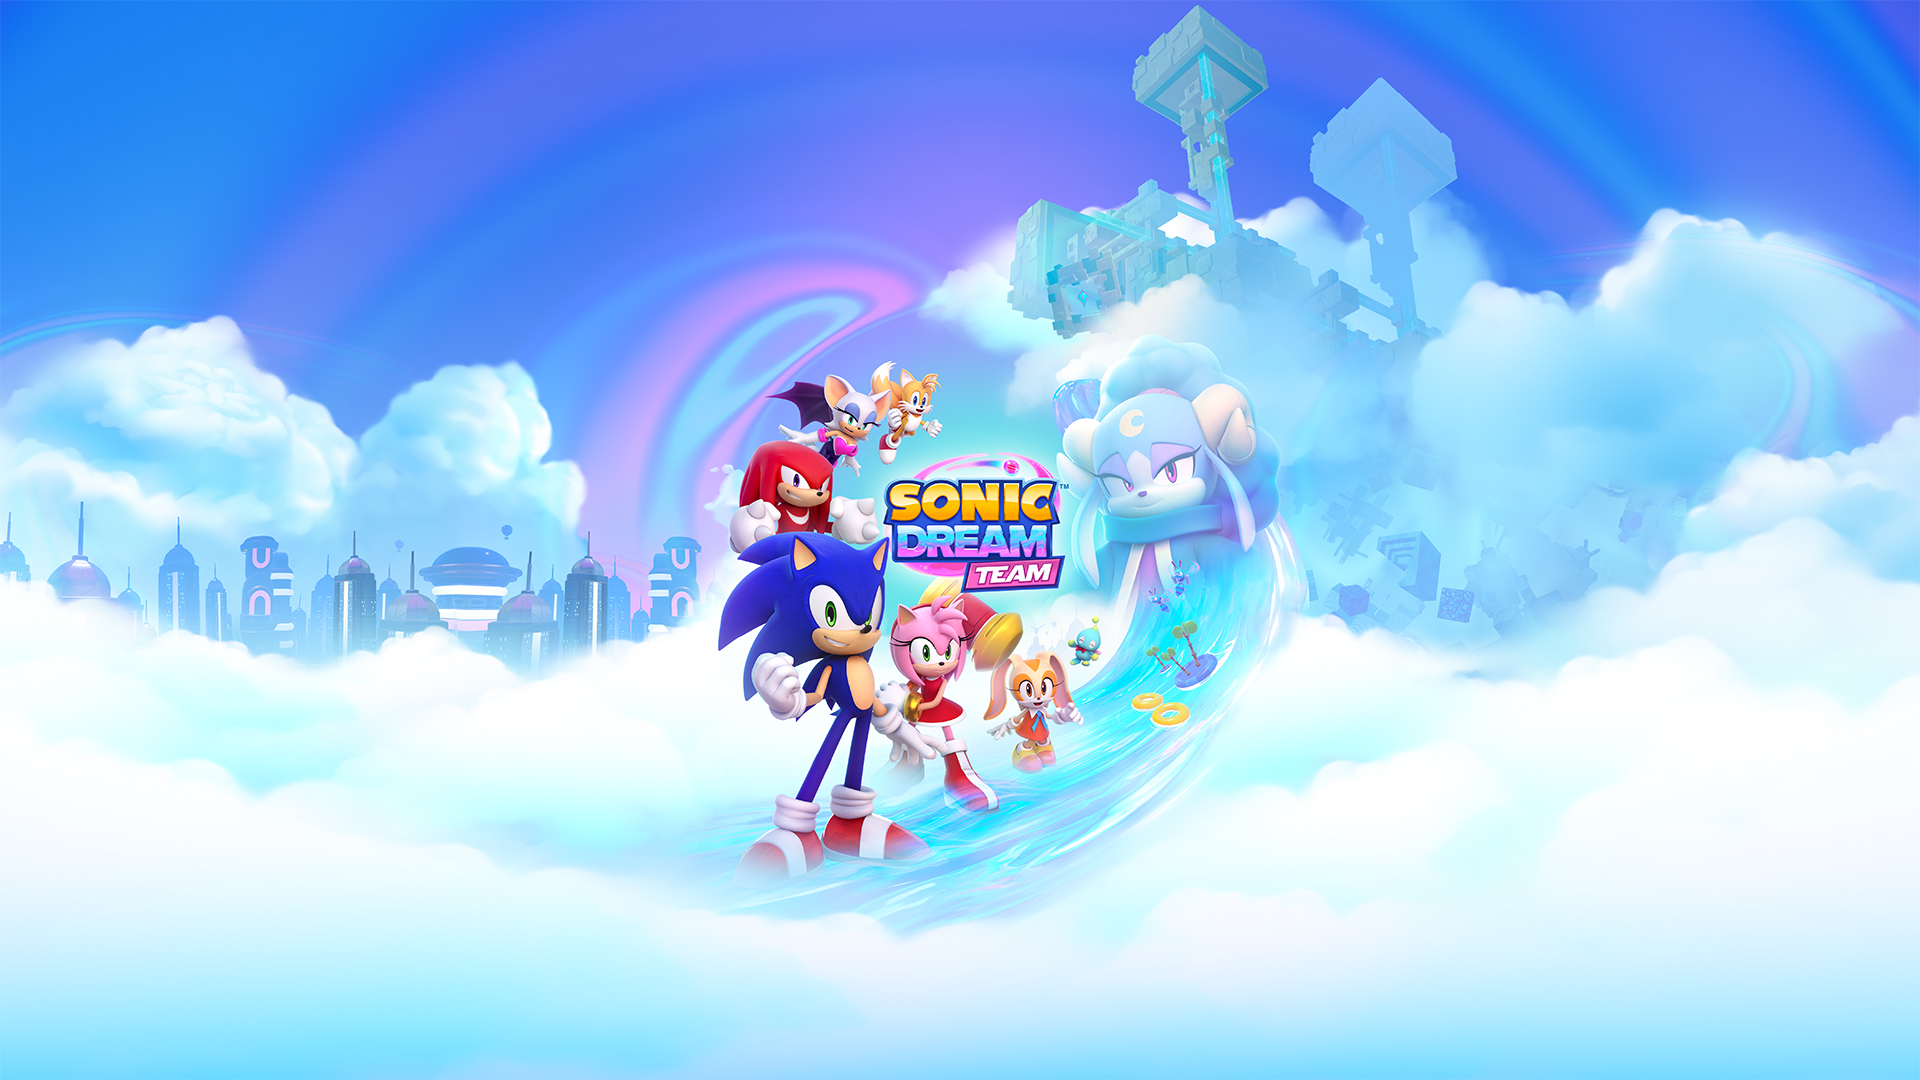 Sonic The Hedgehog 2 Classic for Apple TV by SEGA